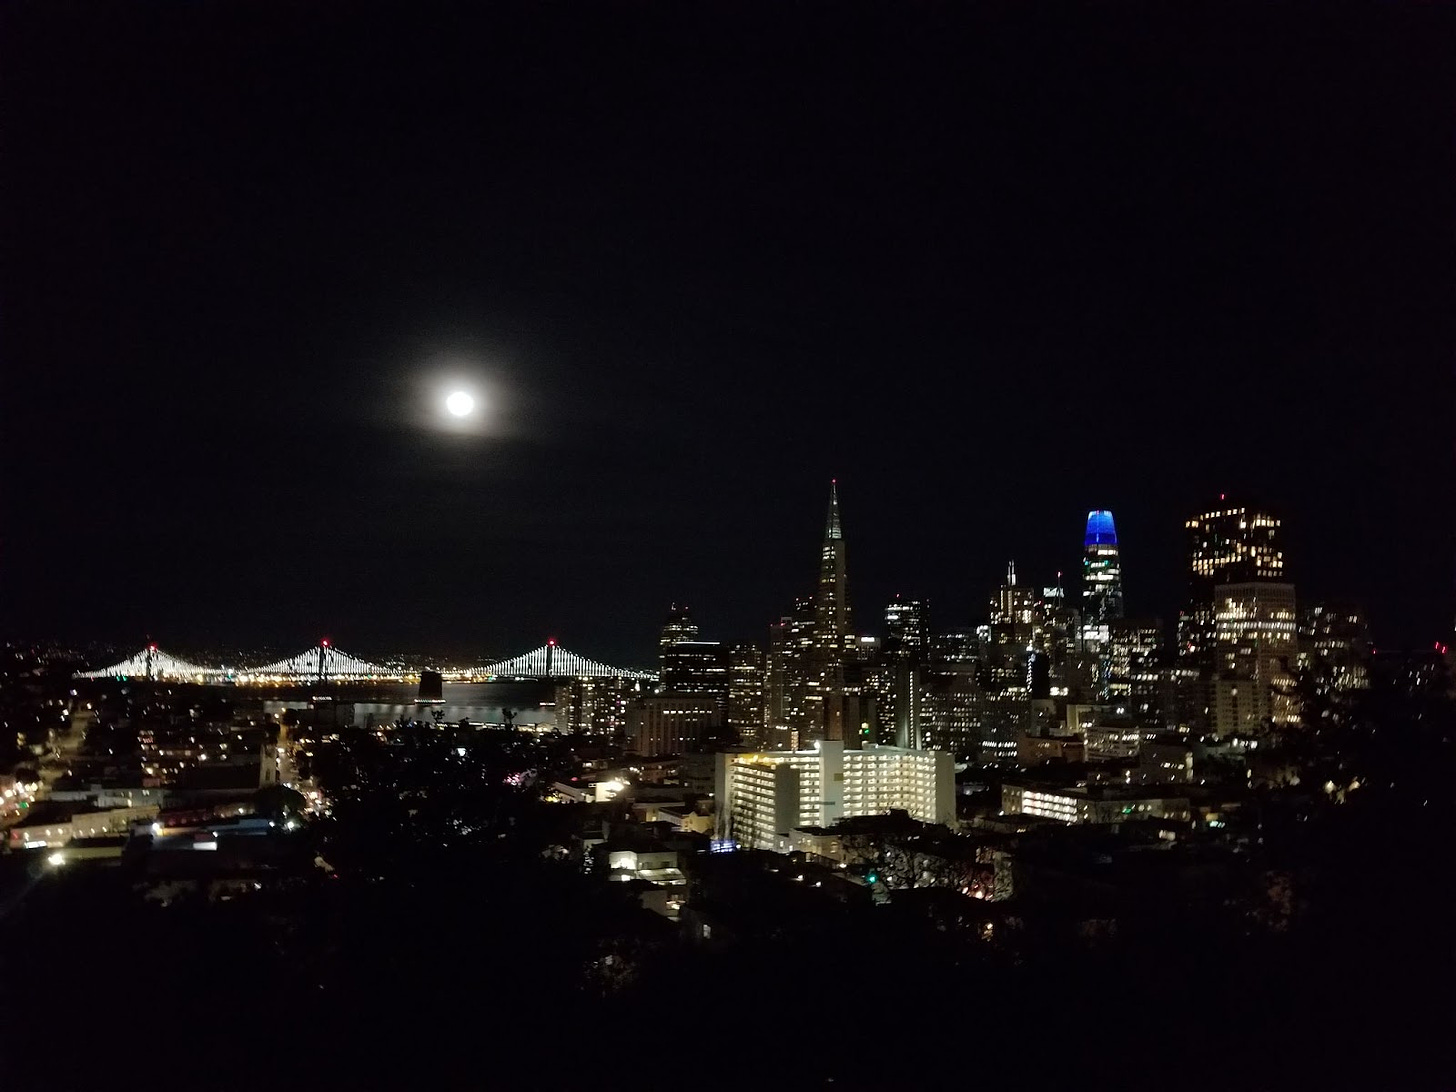 The SF skyline at night